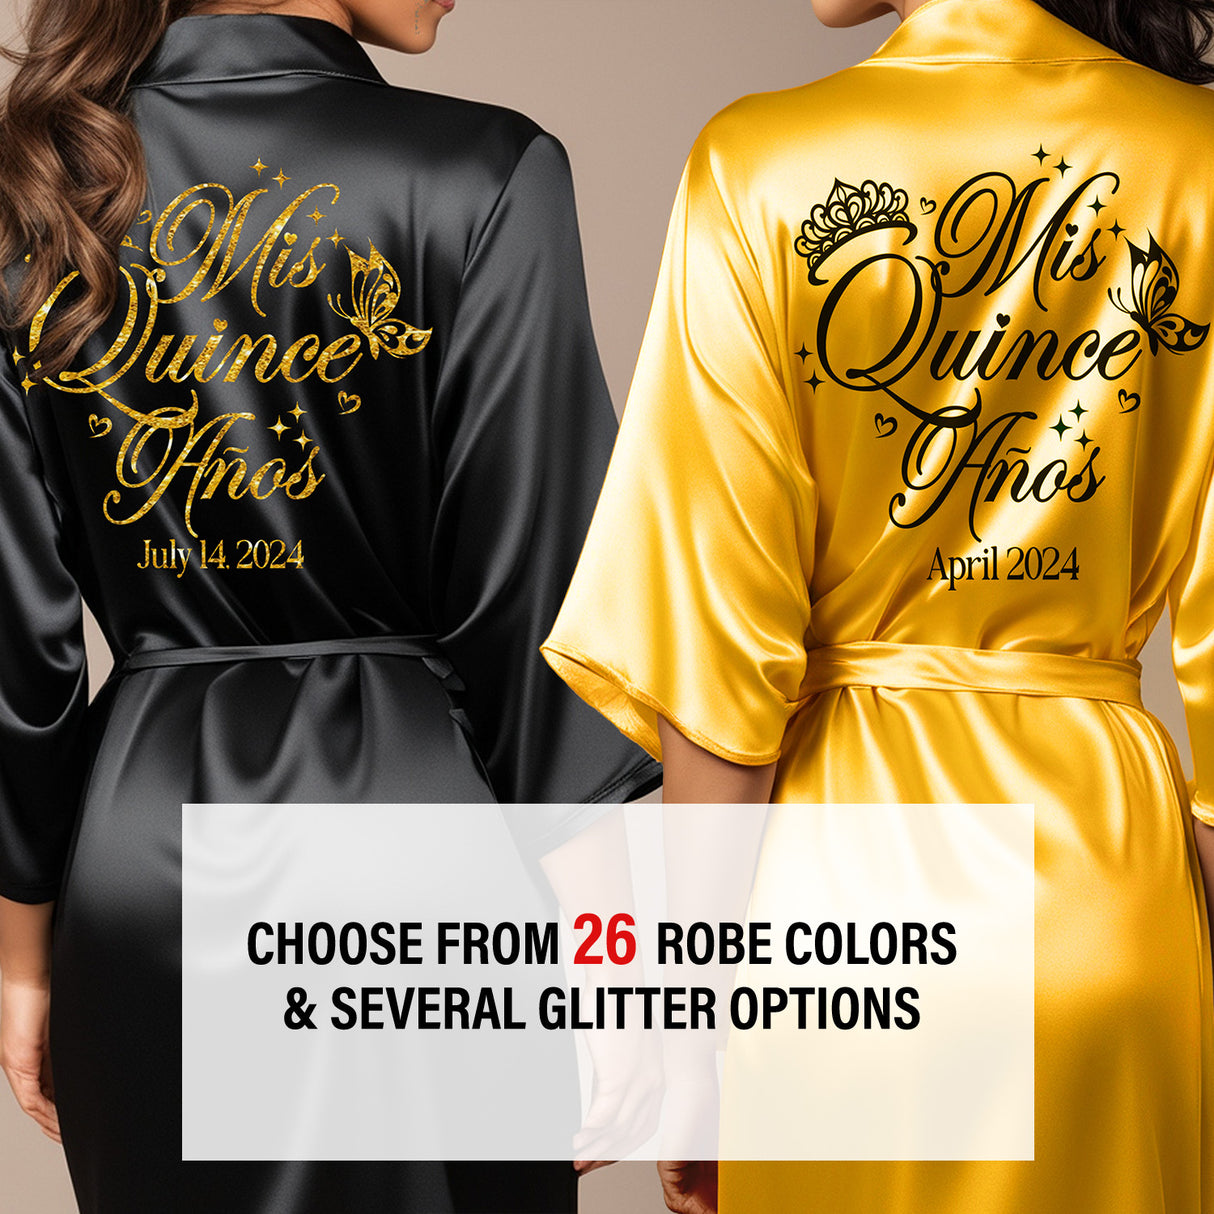 Black and gold quinceanera robes for mis quince anos. Pretty satin black quince robes with gold glitter. all SKUs